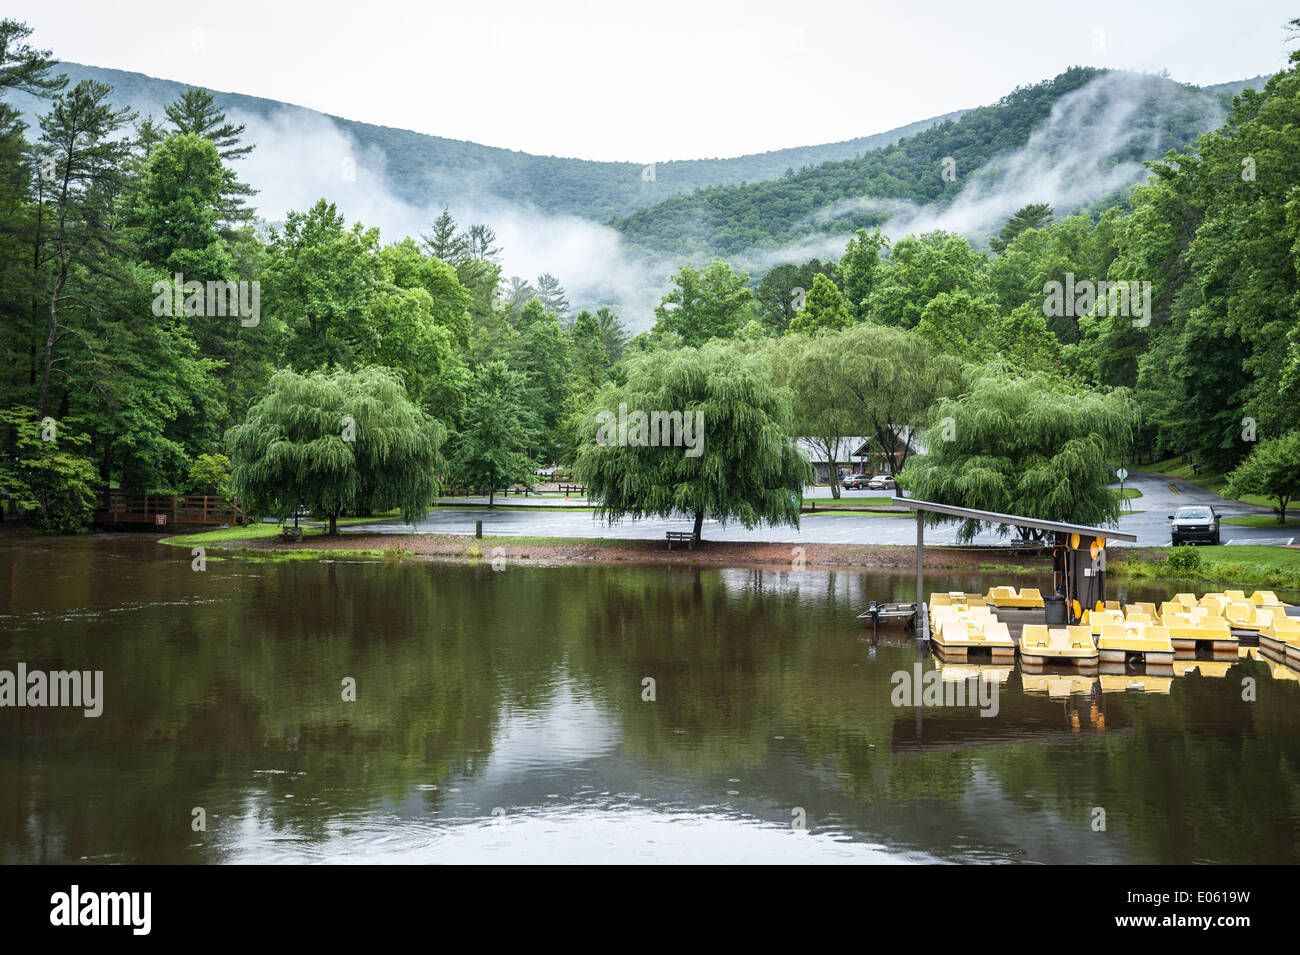 A cloudy mist hangs in the mountain valley in this tranquil scene of Vogel State Park near Blairsville, Georgia, USA. Stock Photo